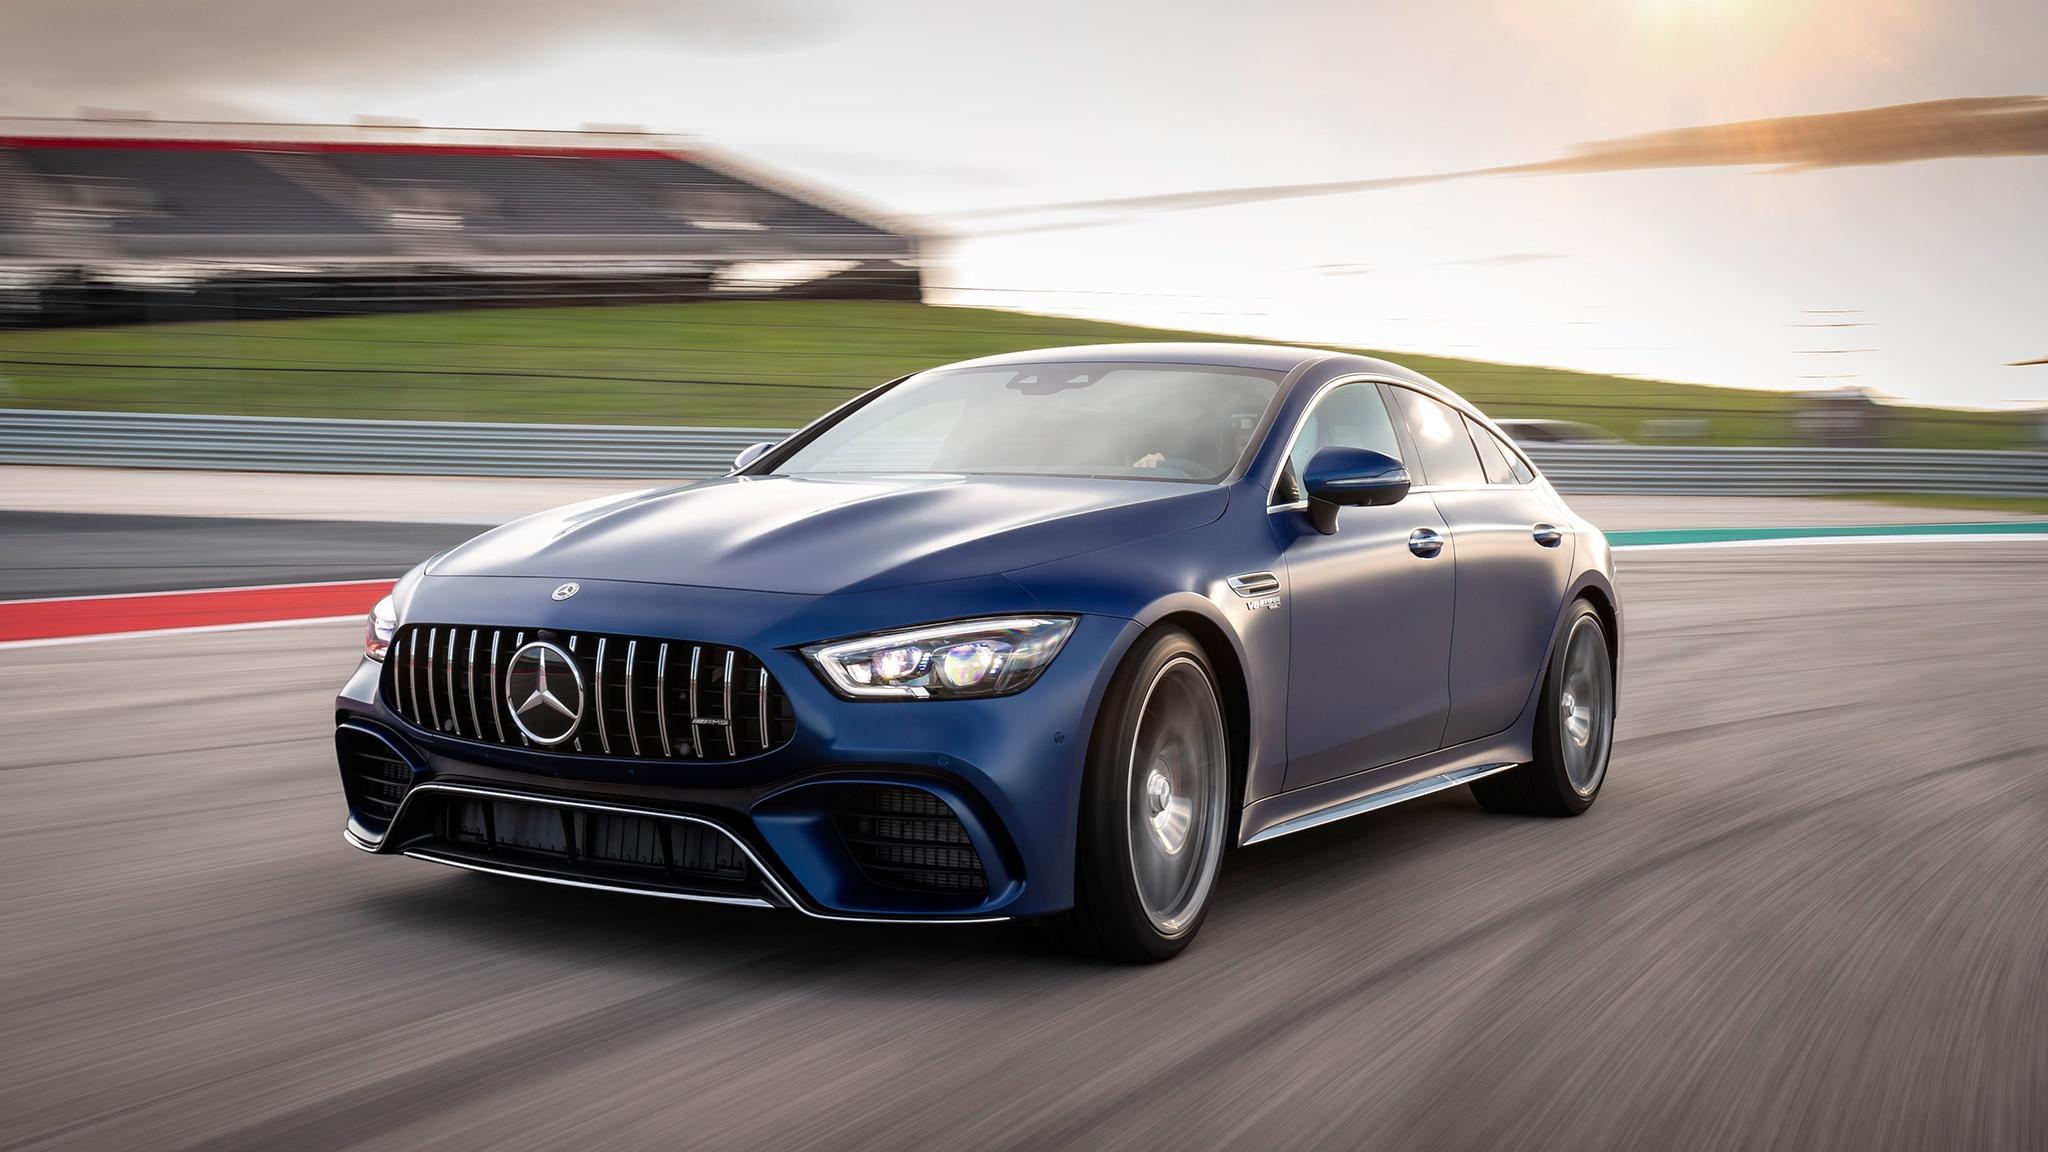 Mercedes AMG GT 4 Door Coupe Technically Sets Nurburgring